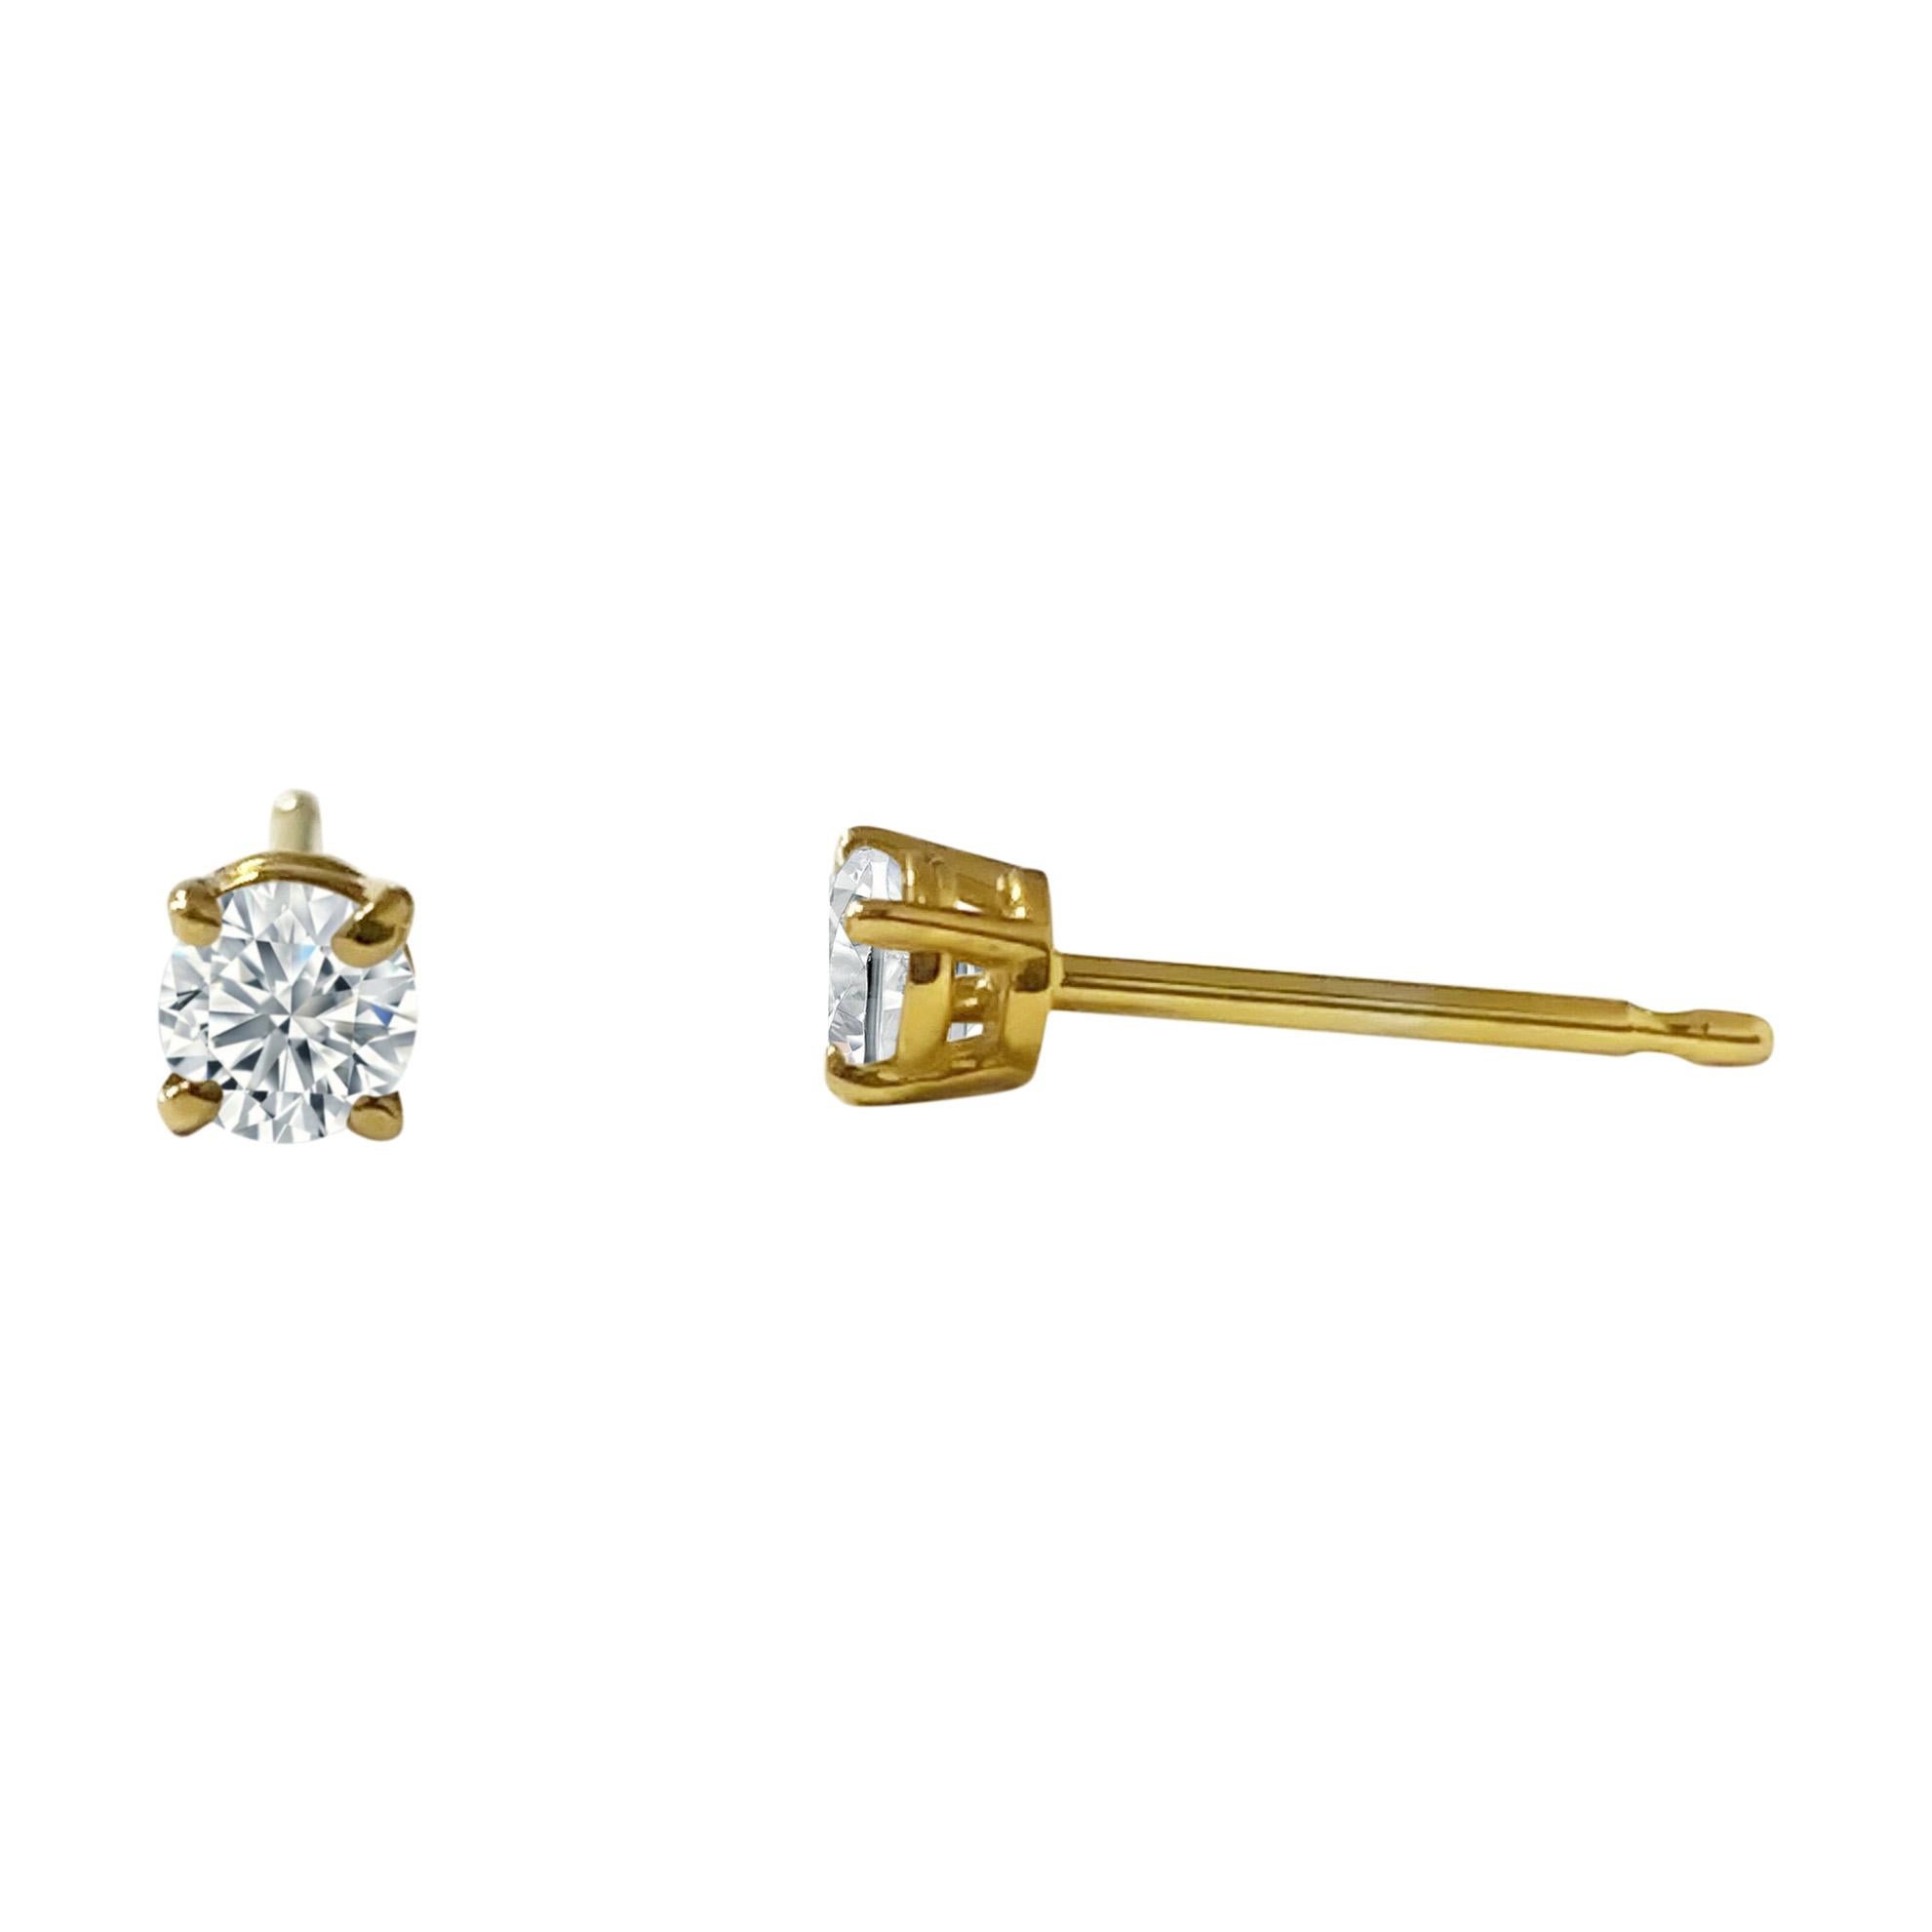 Round Cut 50 Carat Diamond Stud Earrings in 14k Yellow Gold For Sale